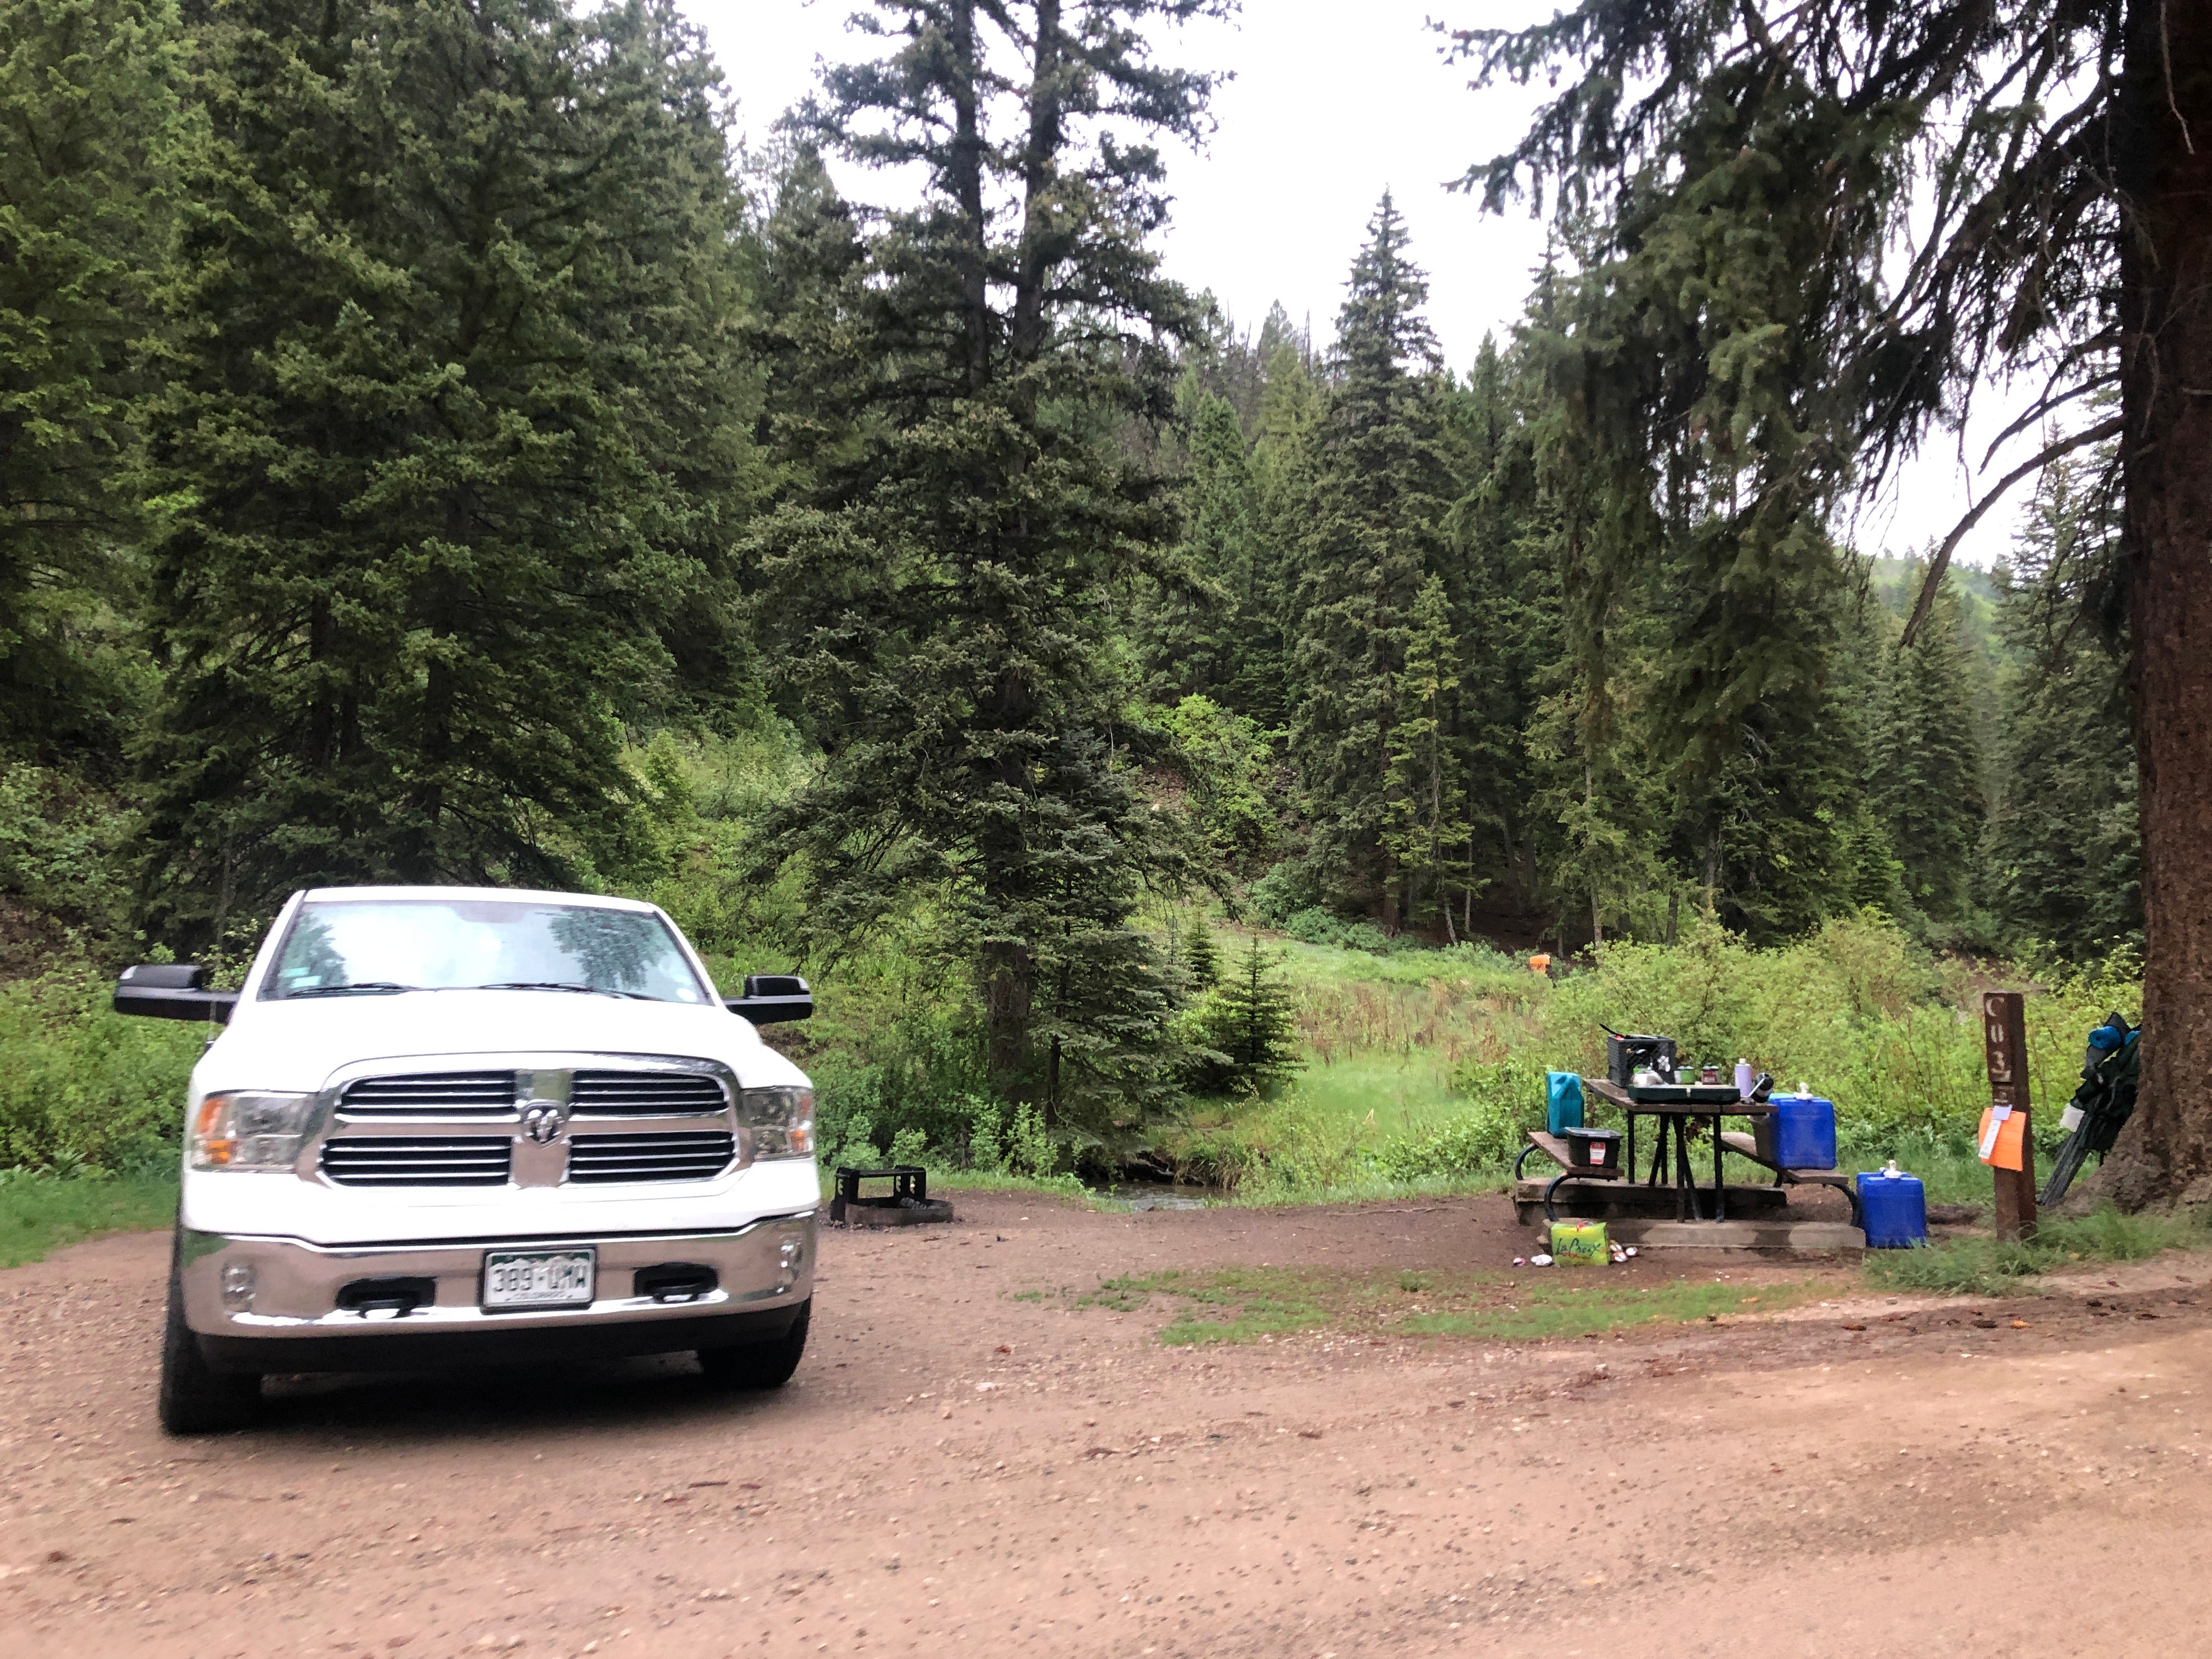 Camper submitted image from Rifle Mountain Park- Sawmill Gulch - 4